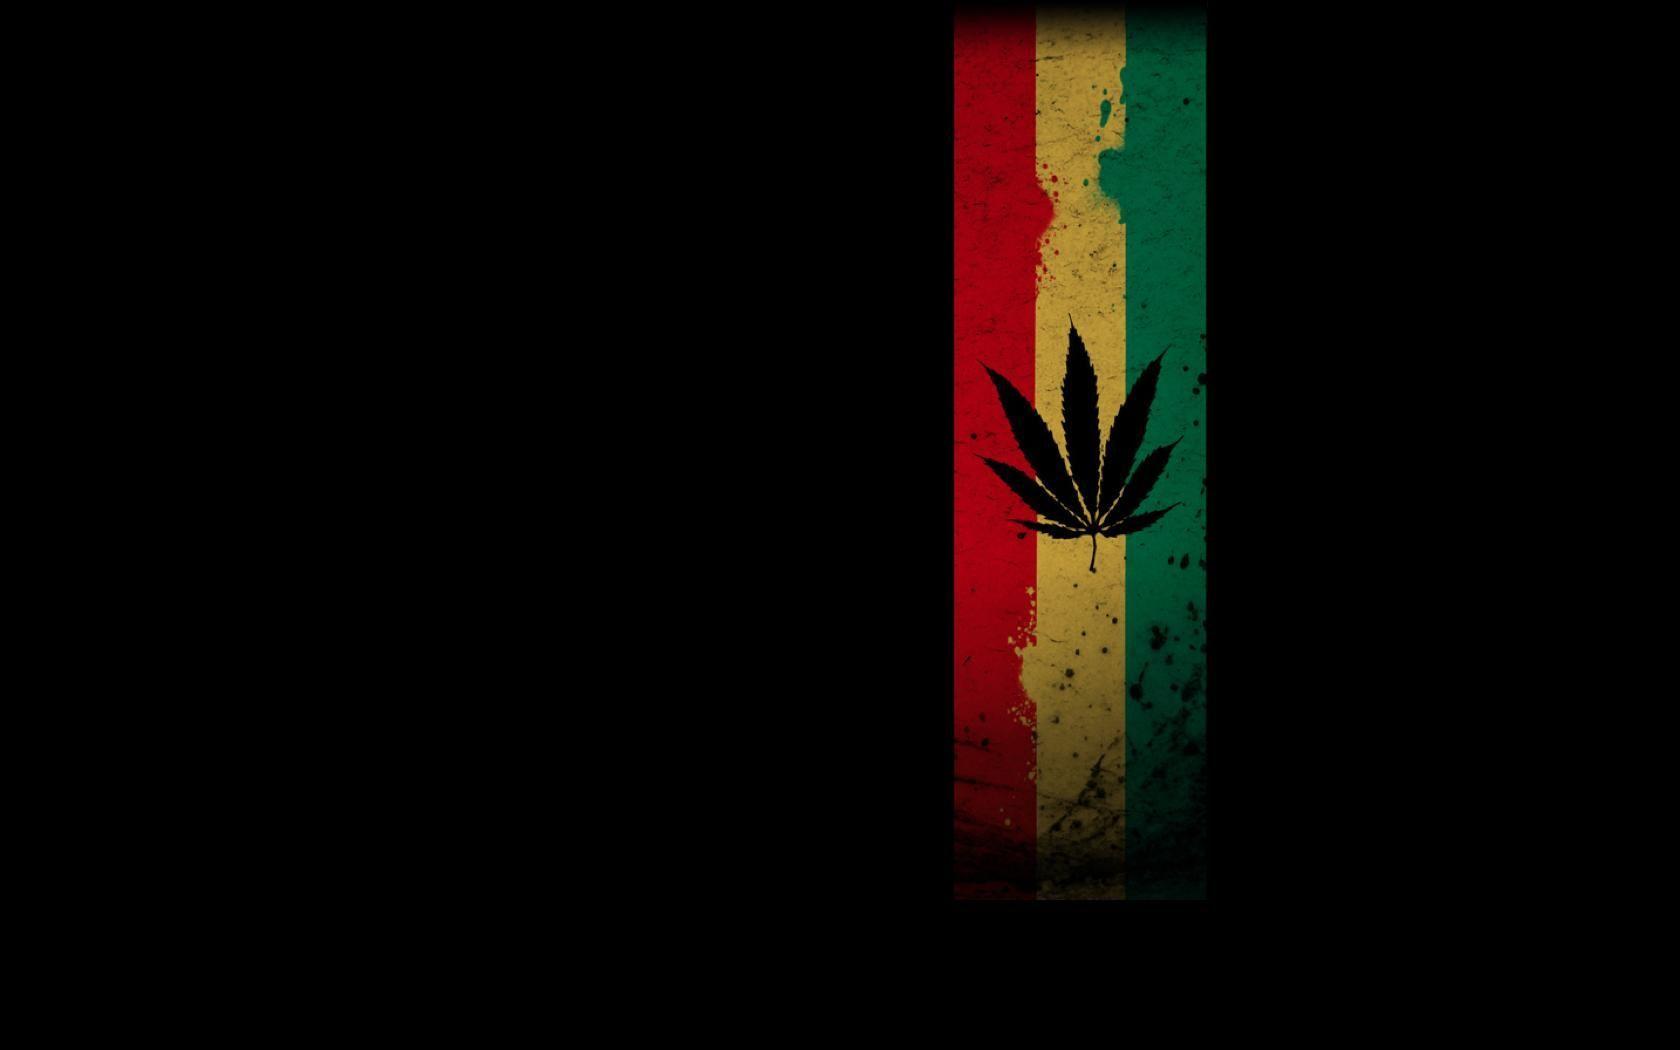 HD Wallpaper Rasta Picture Free Download. Ideas for the House